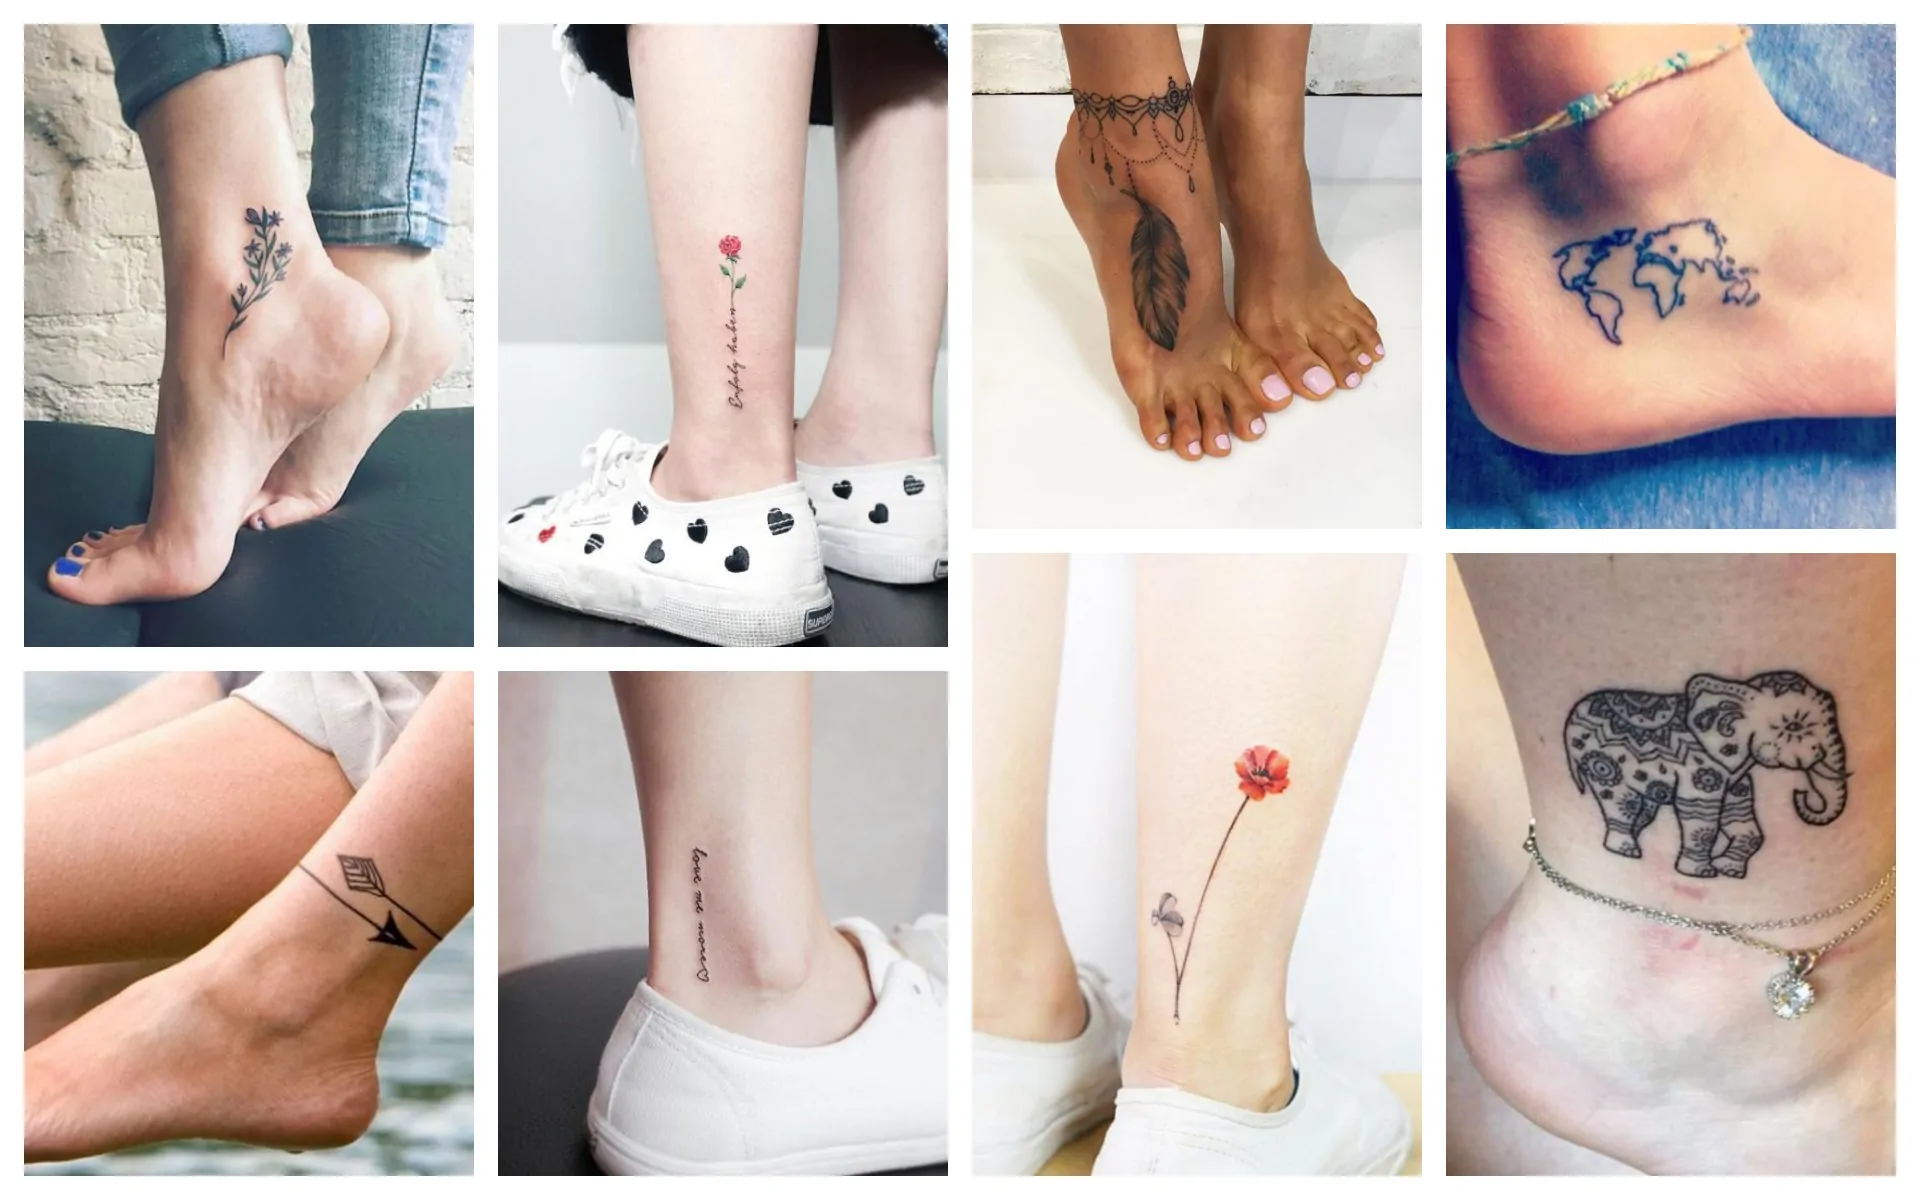 60+ Best Small Tattoo Designs for Women- 2021 - Page 58 of 62 -  belikeanactress. com | Ankle tattoo, Cute tattoos for women, Ankle tattoos  for women